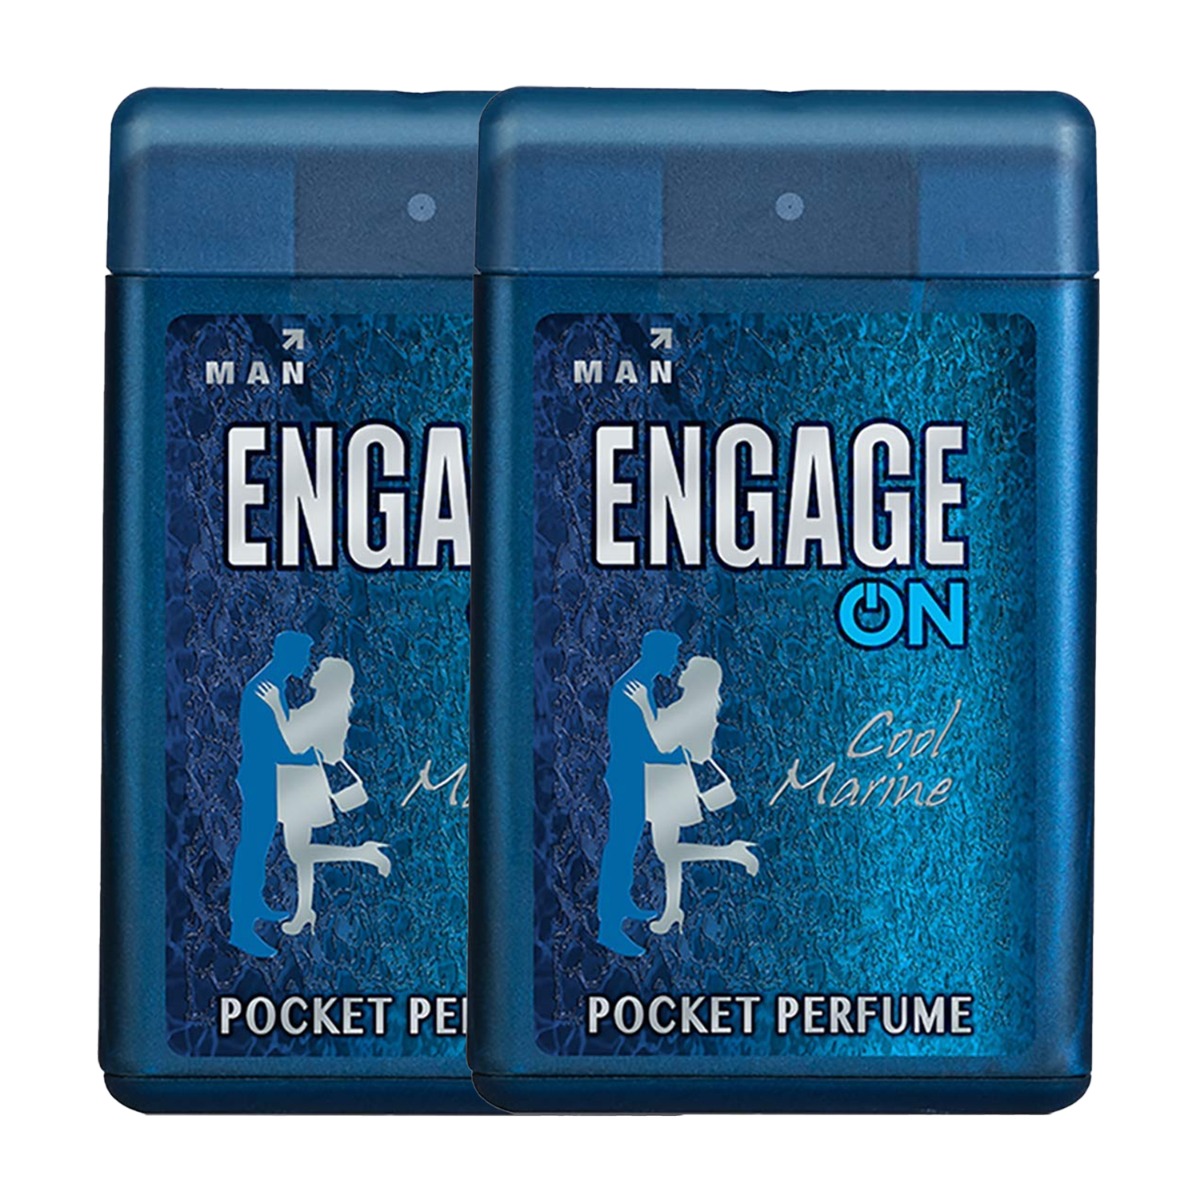 Engage ON Man Cool Marine Assorted - Pack of 2, 18ml Each